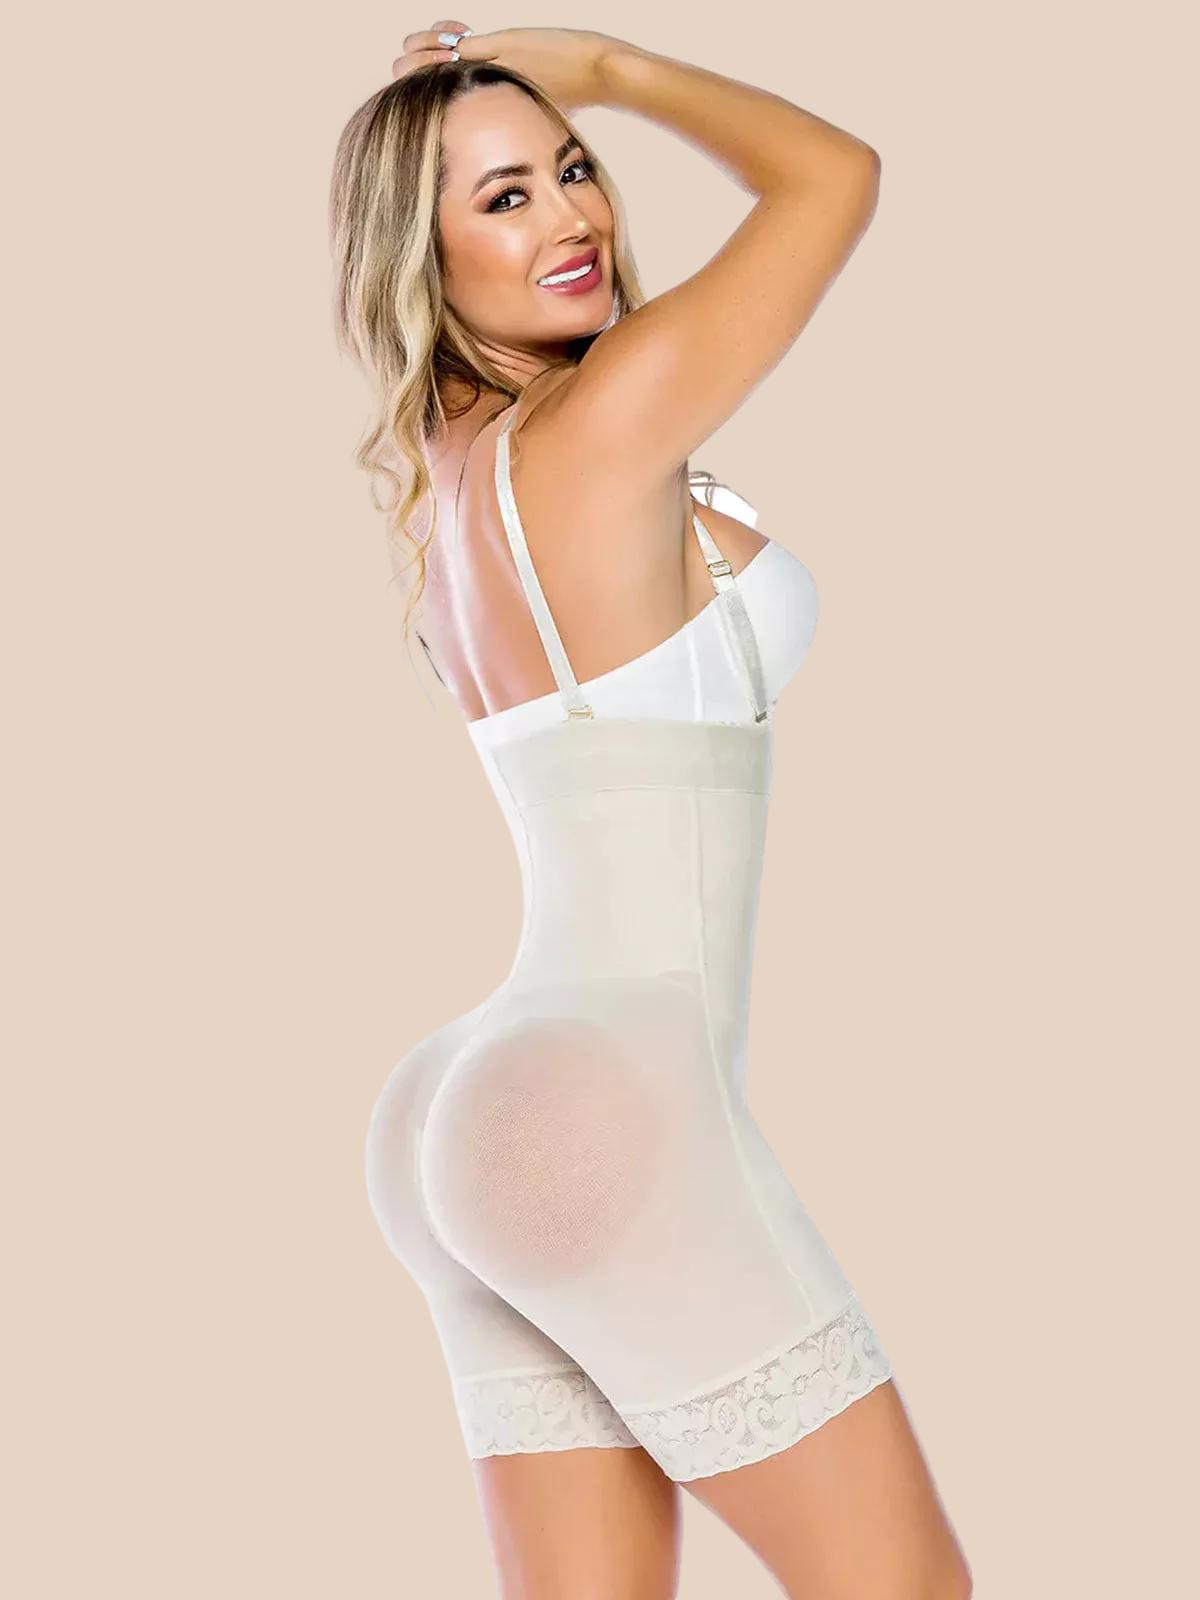 Apricot 1 Pc Fajas Colombianas High Waist Trainer Body Shapewear Slimming  Sheath Women Flat Belly Butt Lifter Shapers Panties Push Up Corset With  Hooks